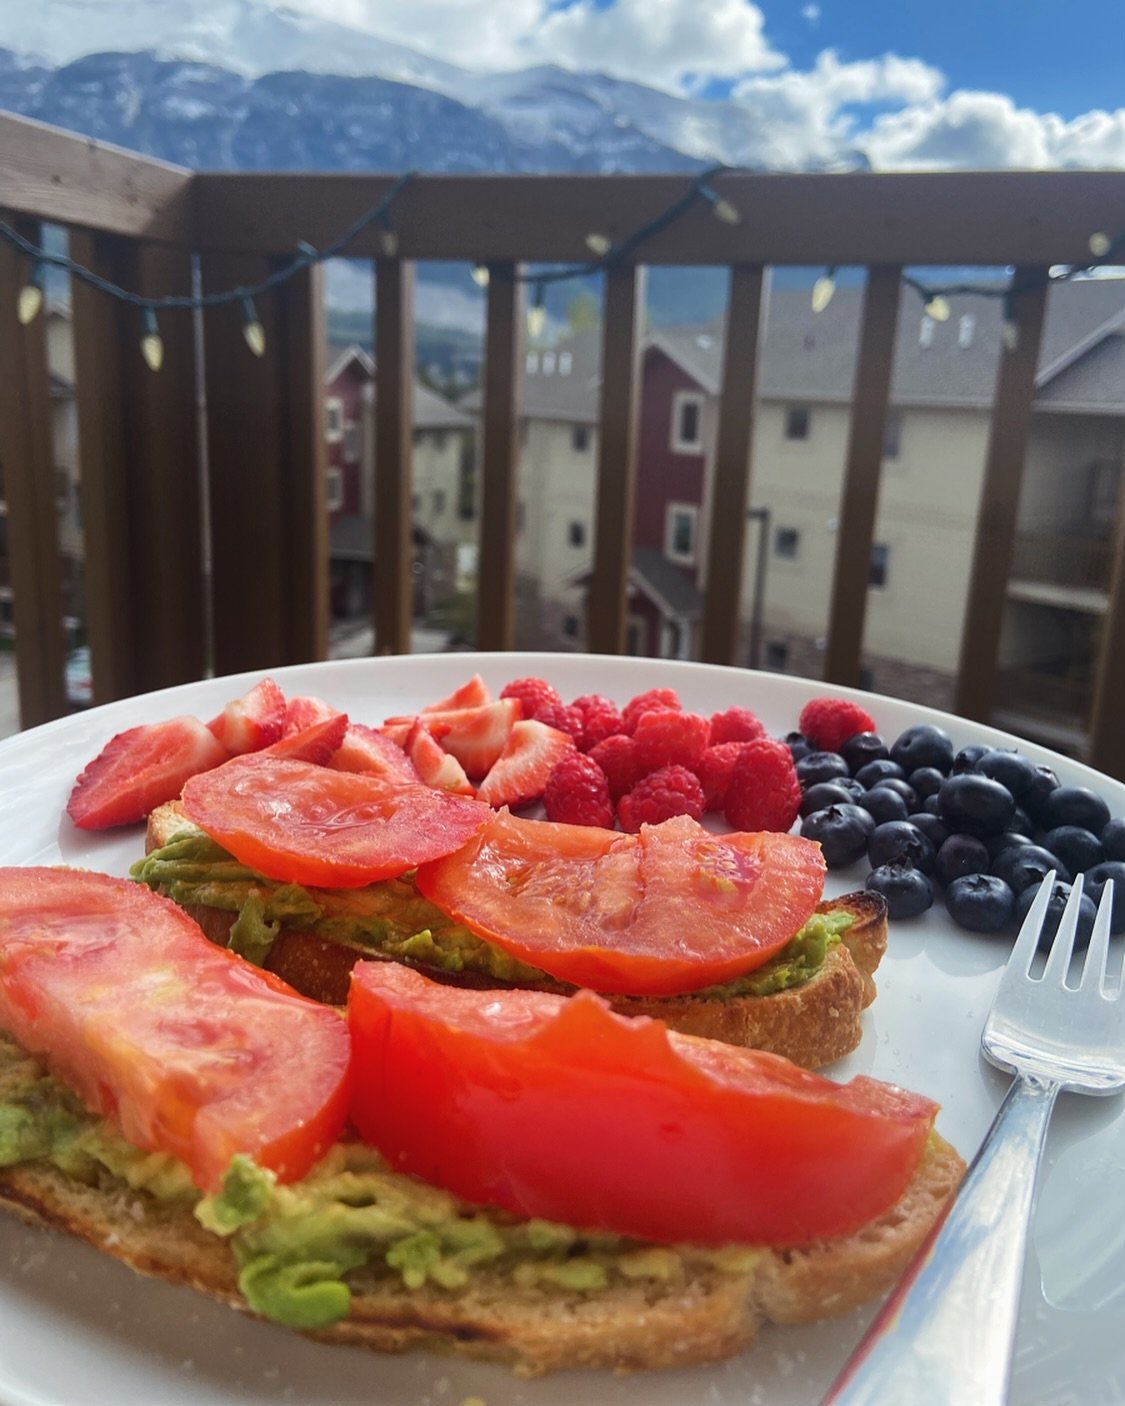 When the day starts with your daughter making you breakfast and the balcony cushions are dry enough to sit on them❤️😍❤️!

Wishing you an incredible long weekend full of love and joy 💕

xo, Dr. Monika 🦋

#motherdaughterlove #mindfulmama #womensuppo